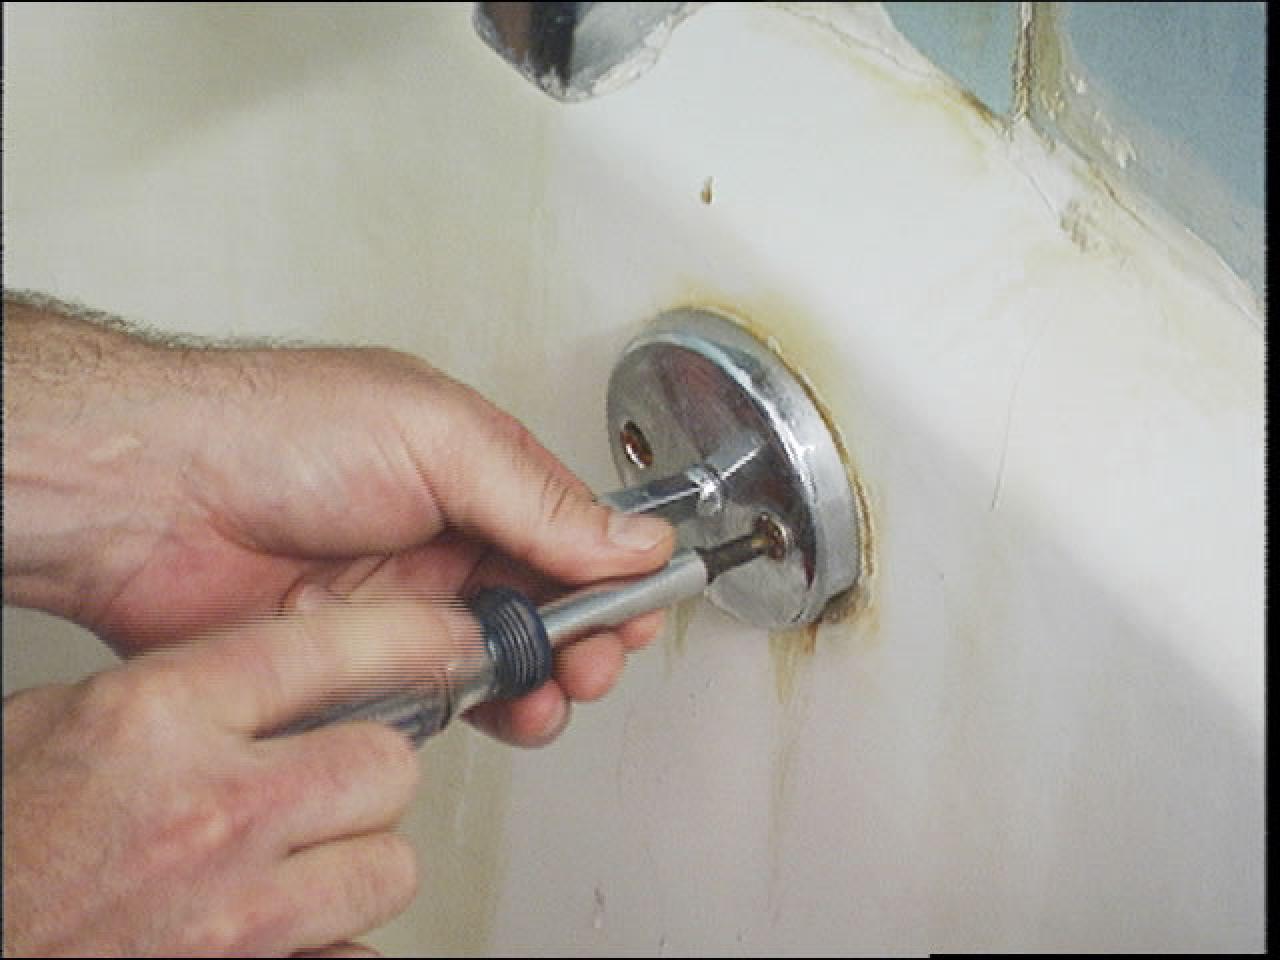 Unclog A Bathtub Using The Trip Lever, How To Clean Hair Out Of Your Bathtub Drain